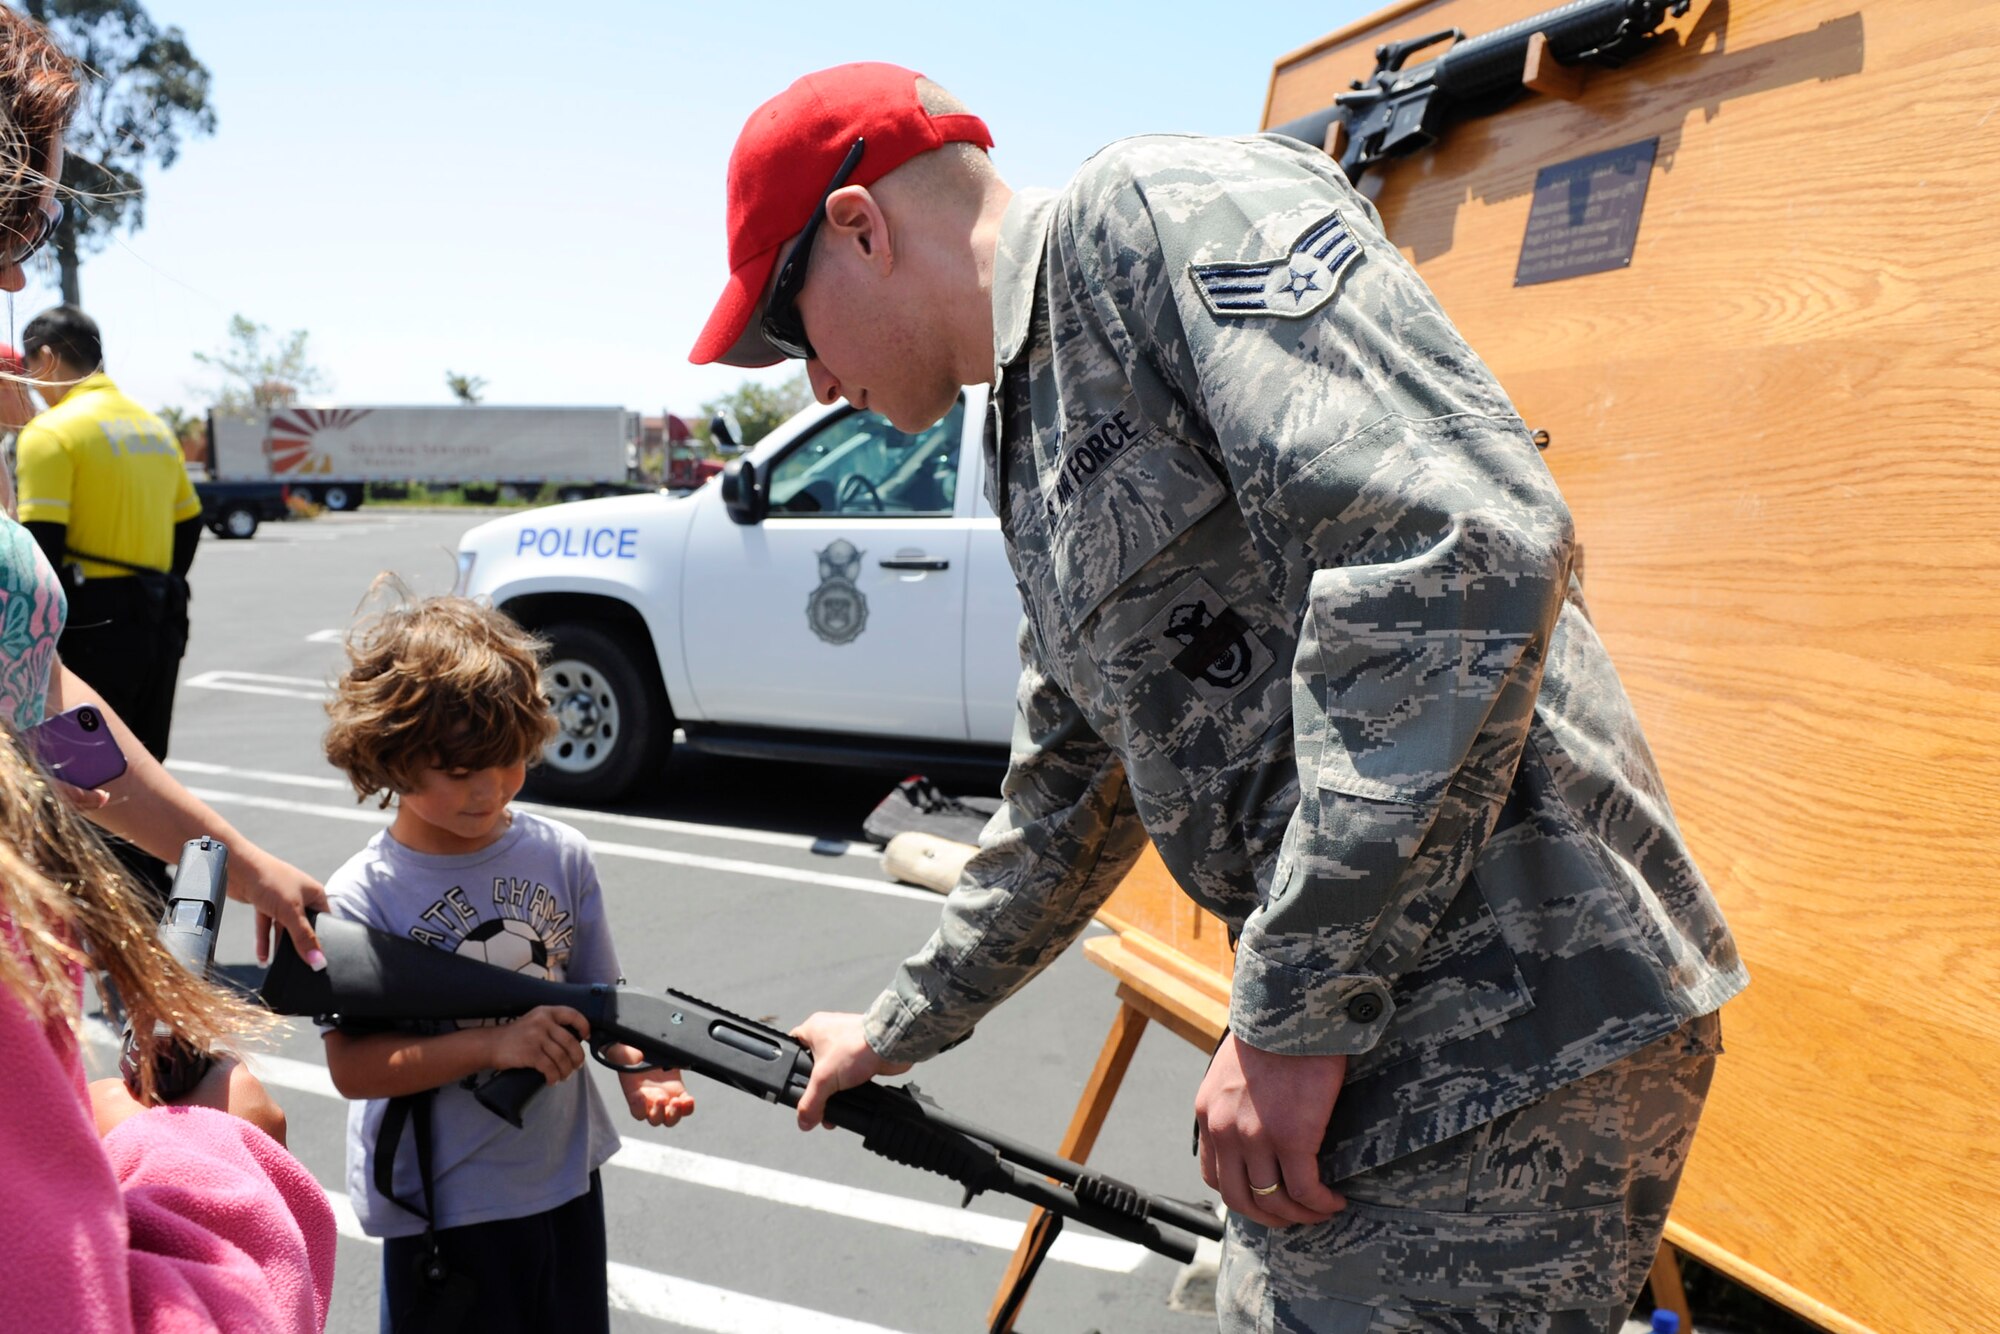 VANDENBERG AIR FORCE BASE, Calif. -- Senior Airman Nathan Lowman, a 30th Security Forces Squadron combat arms instructor, shows a local boy a pistol used by the U.S. Air Force during a police display event at the Albertsons parking lot in Lompoc, Wednesday, May 16th, 2012. The display was held in conjunction with National Police Week, an annual celebration that recognizes the service and sacrifice of U.S. law enforcement personnel. (U.S. Air Force photo/Staff Sgt. Levi Riendeau)